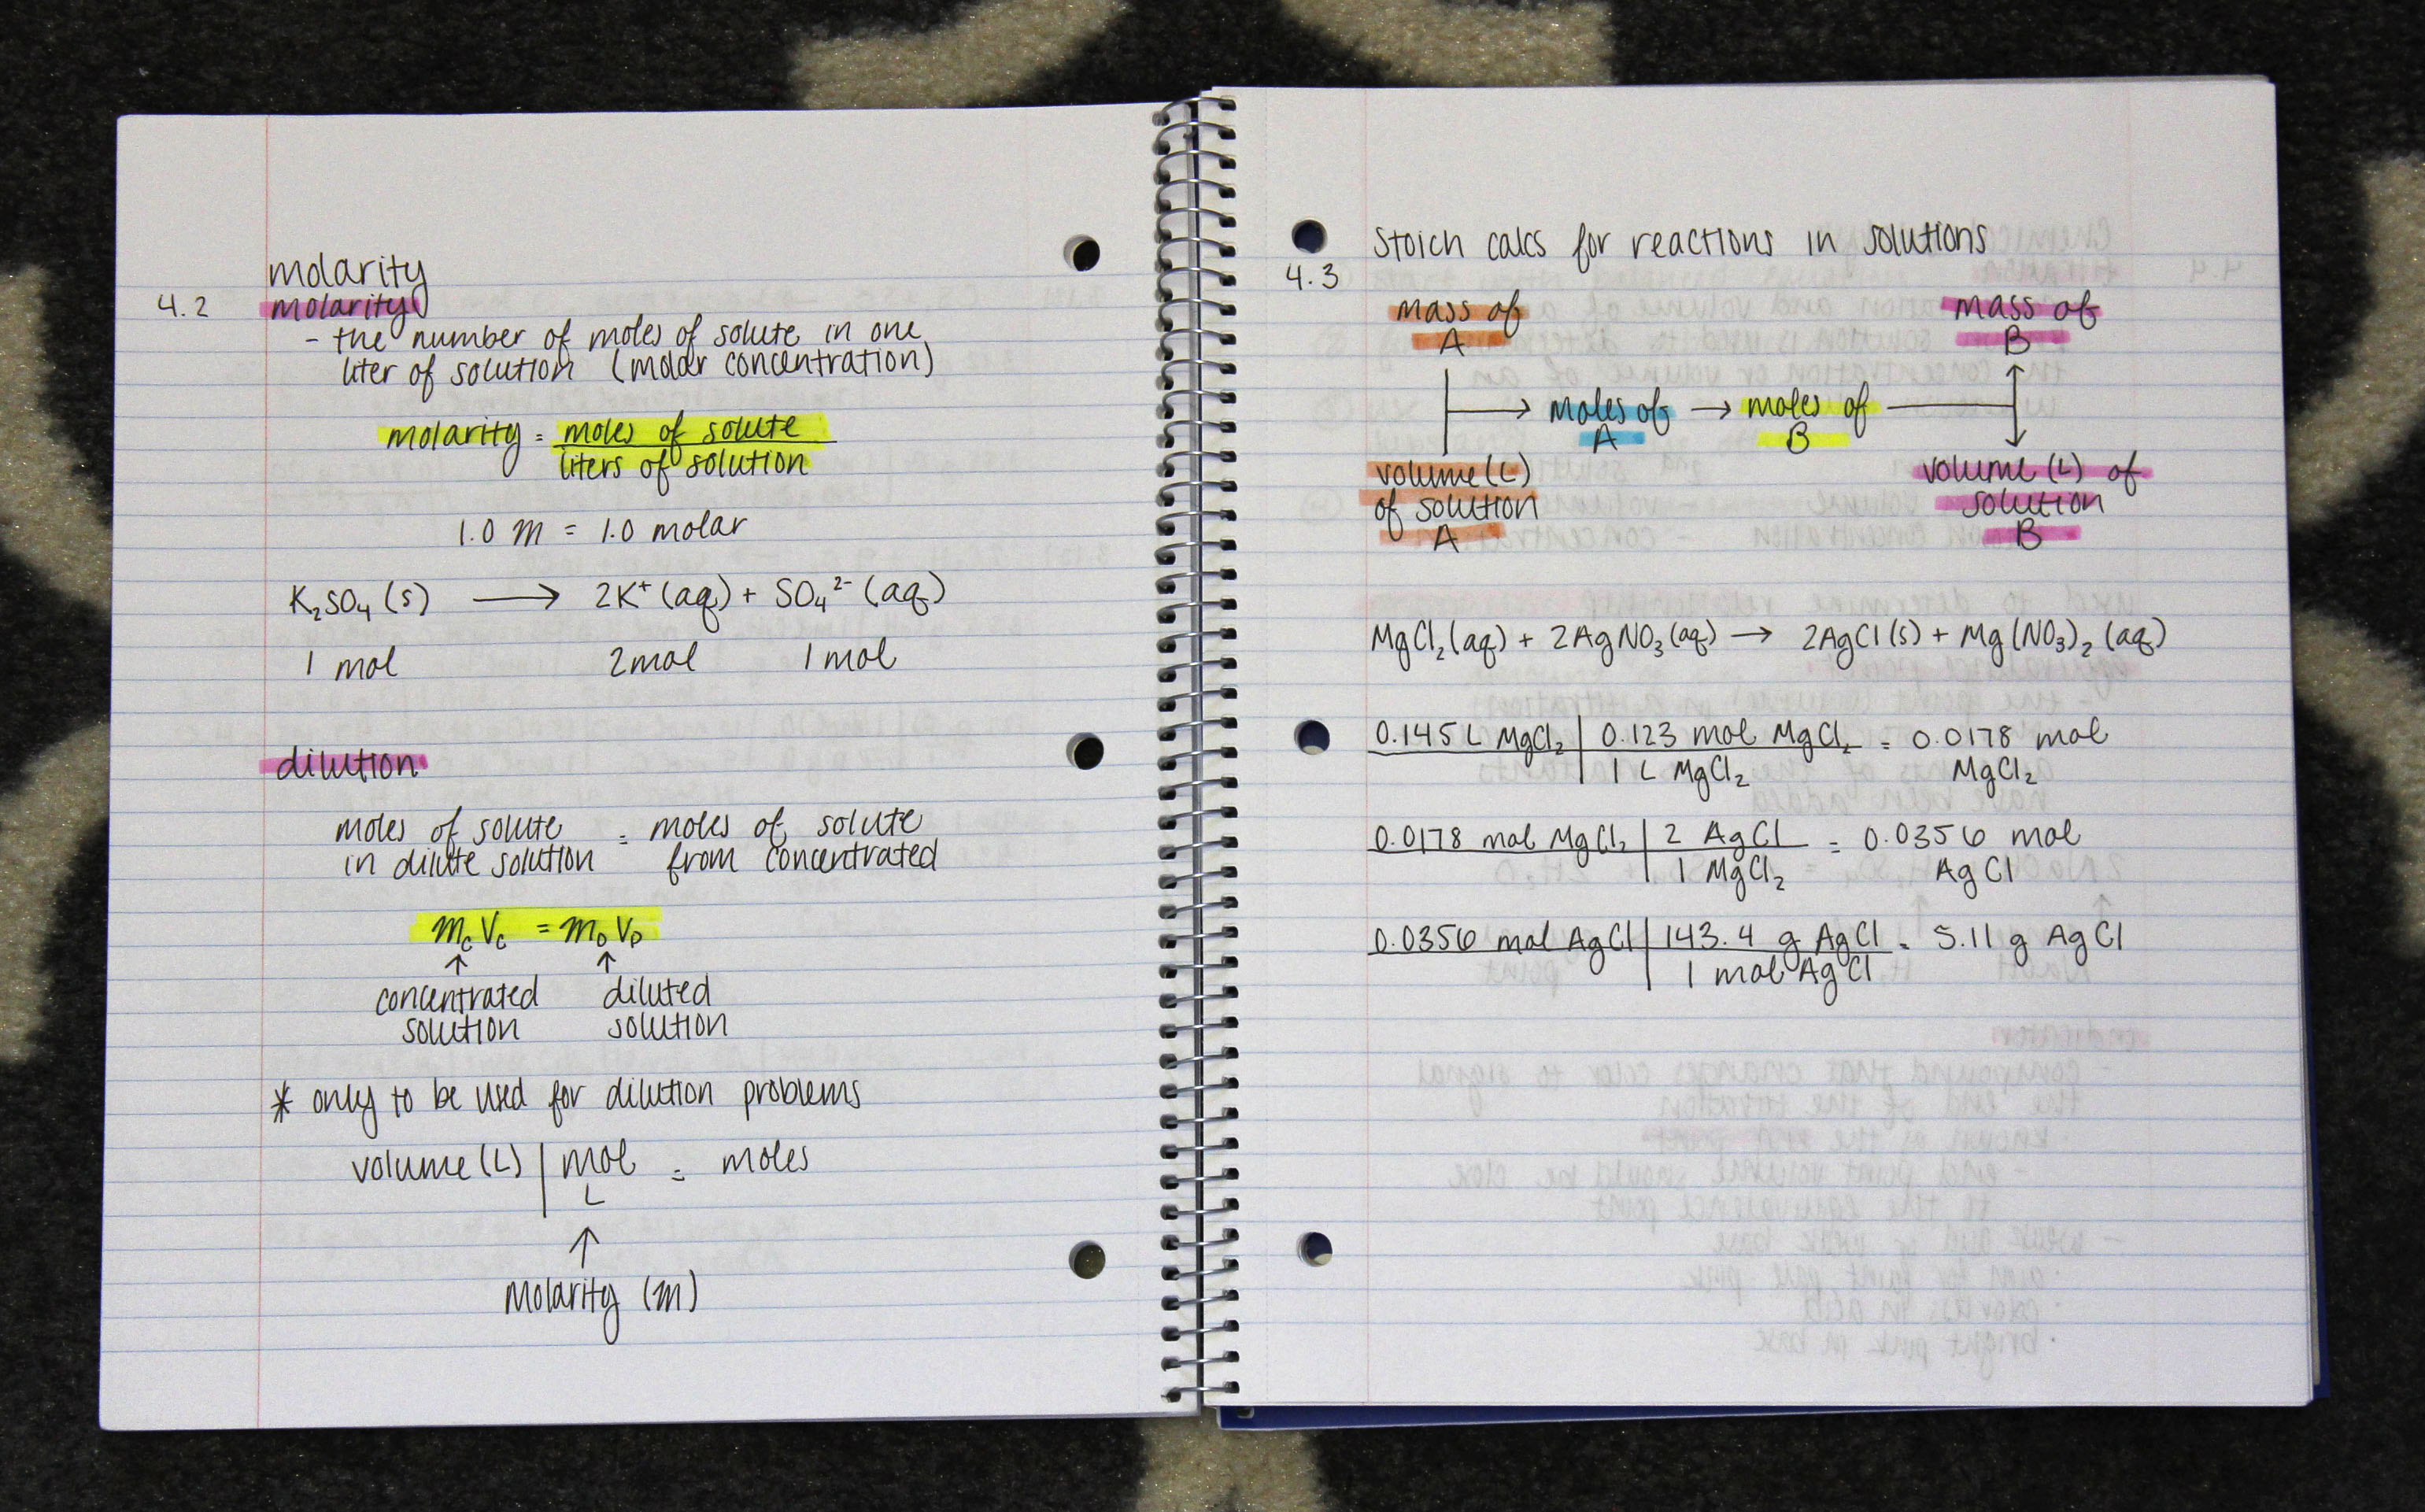 19 Notetaking Tips for College Students